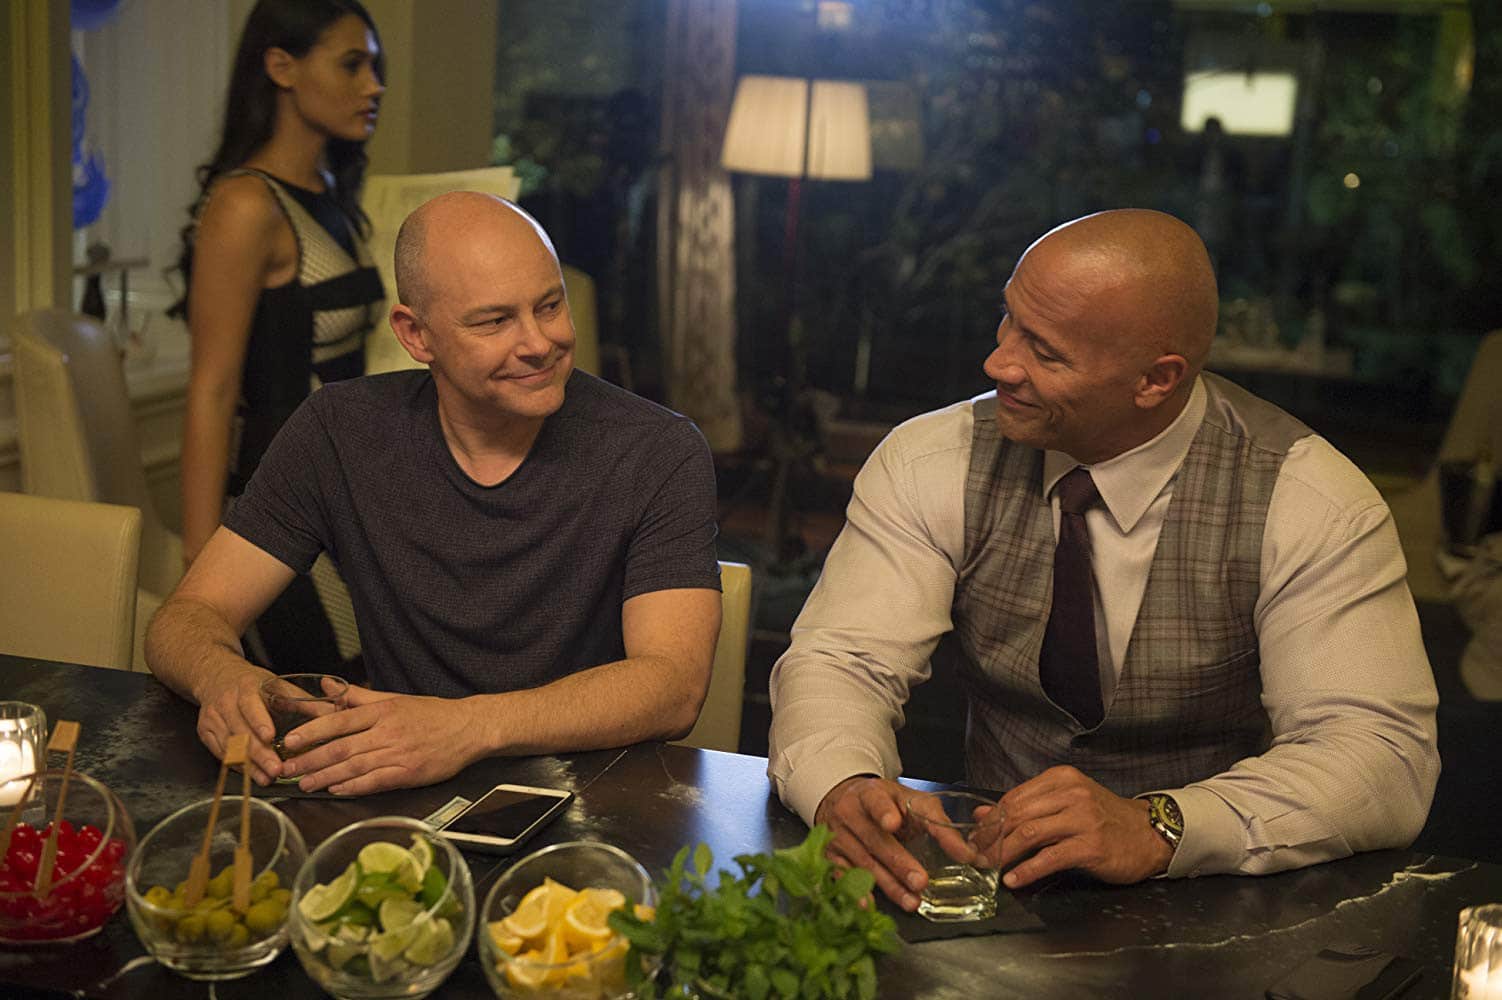 ‘ballers’ tackles issues of racial identity in its latest episode